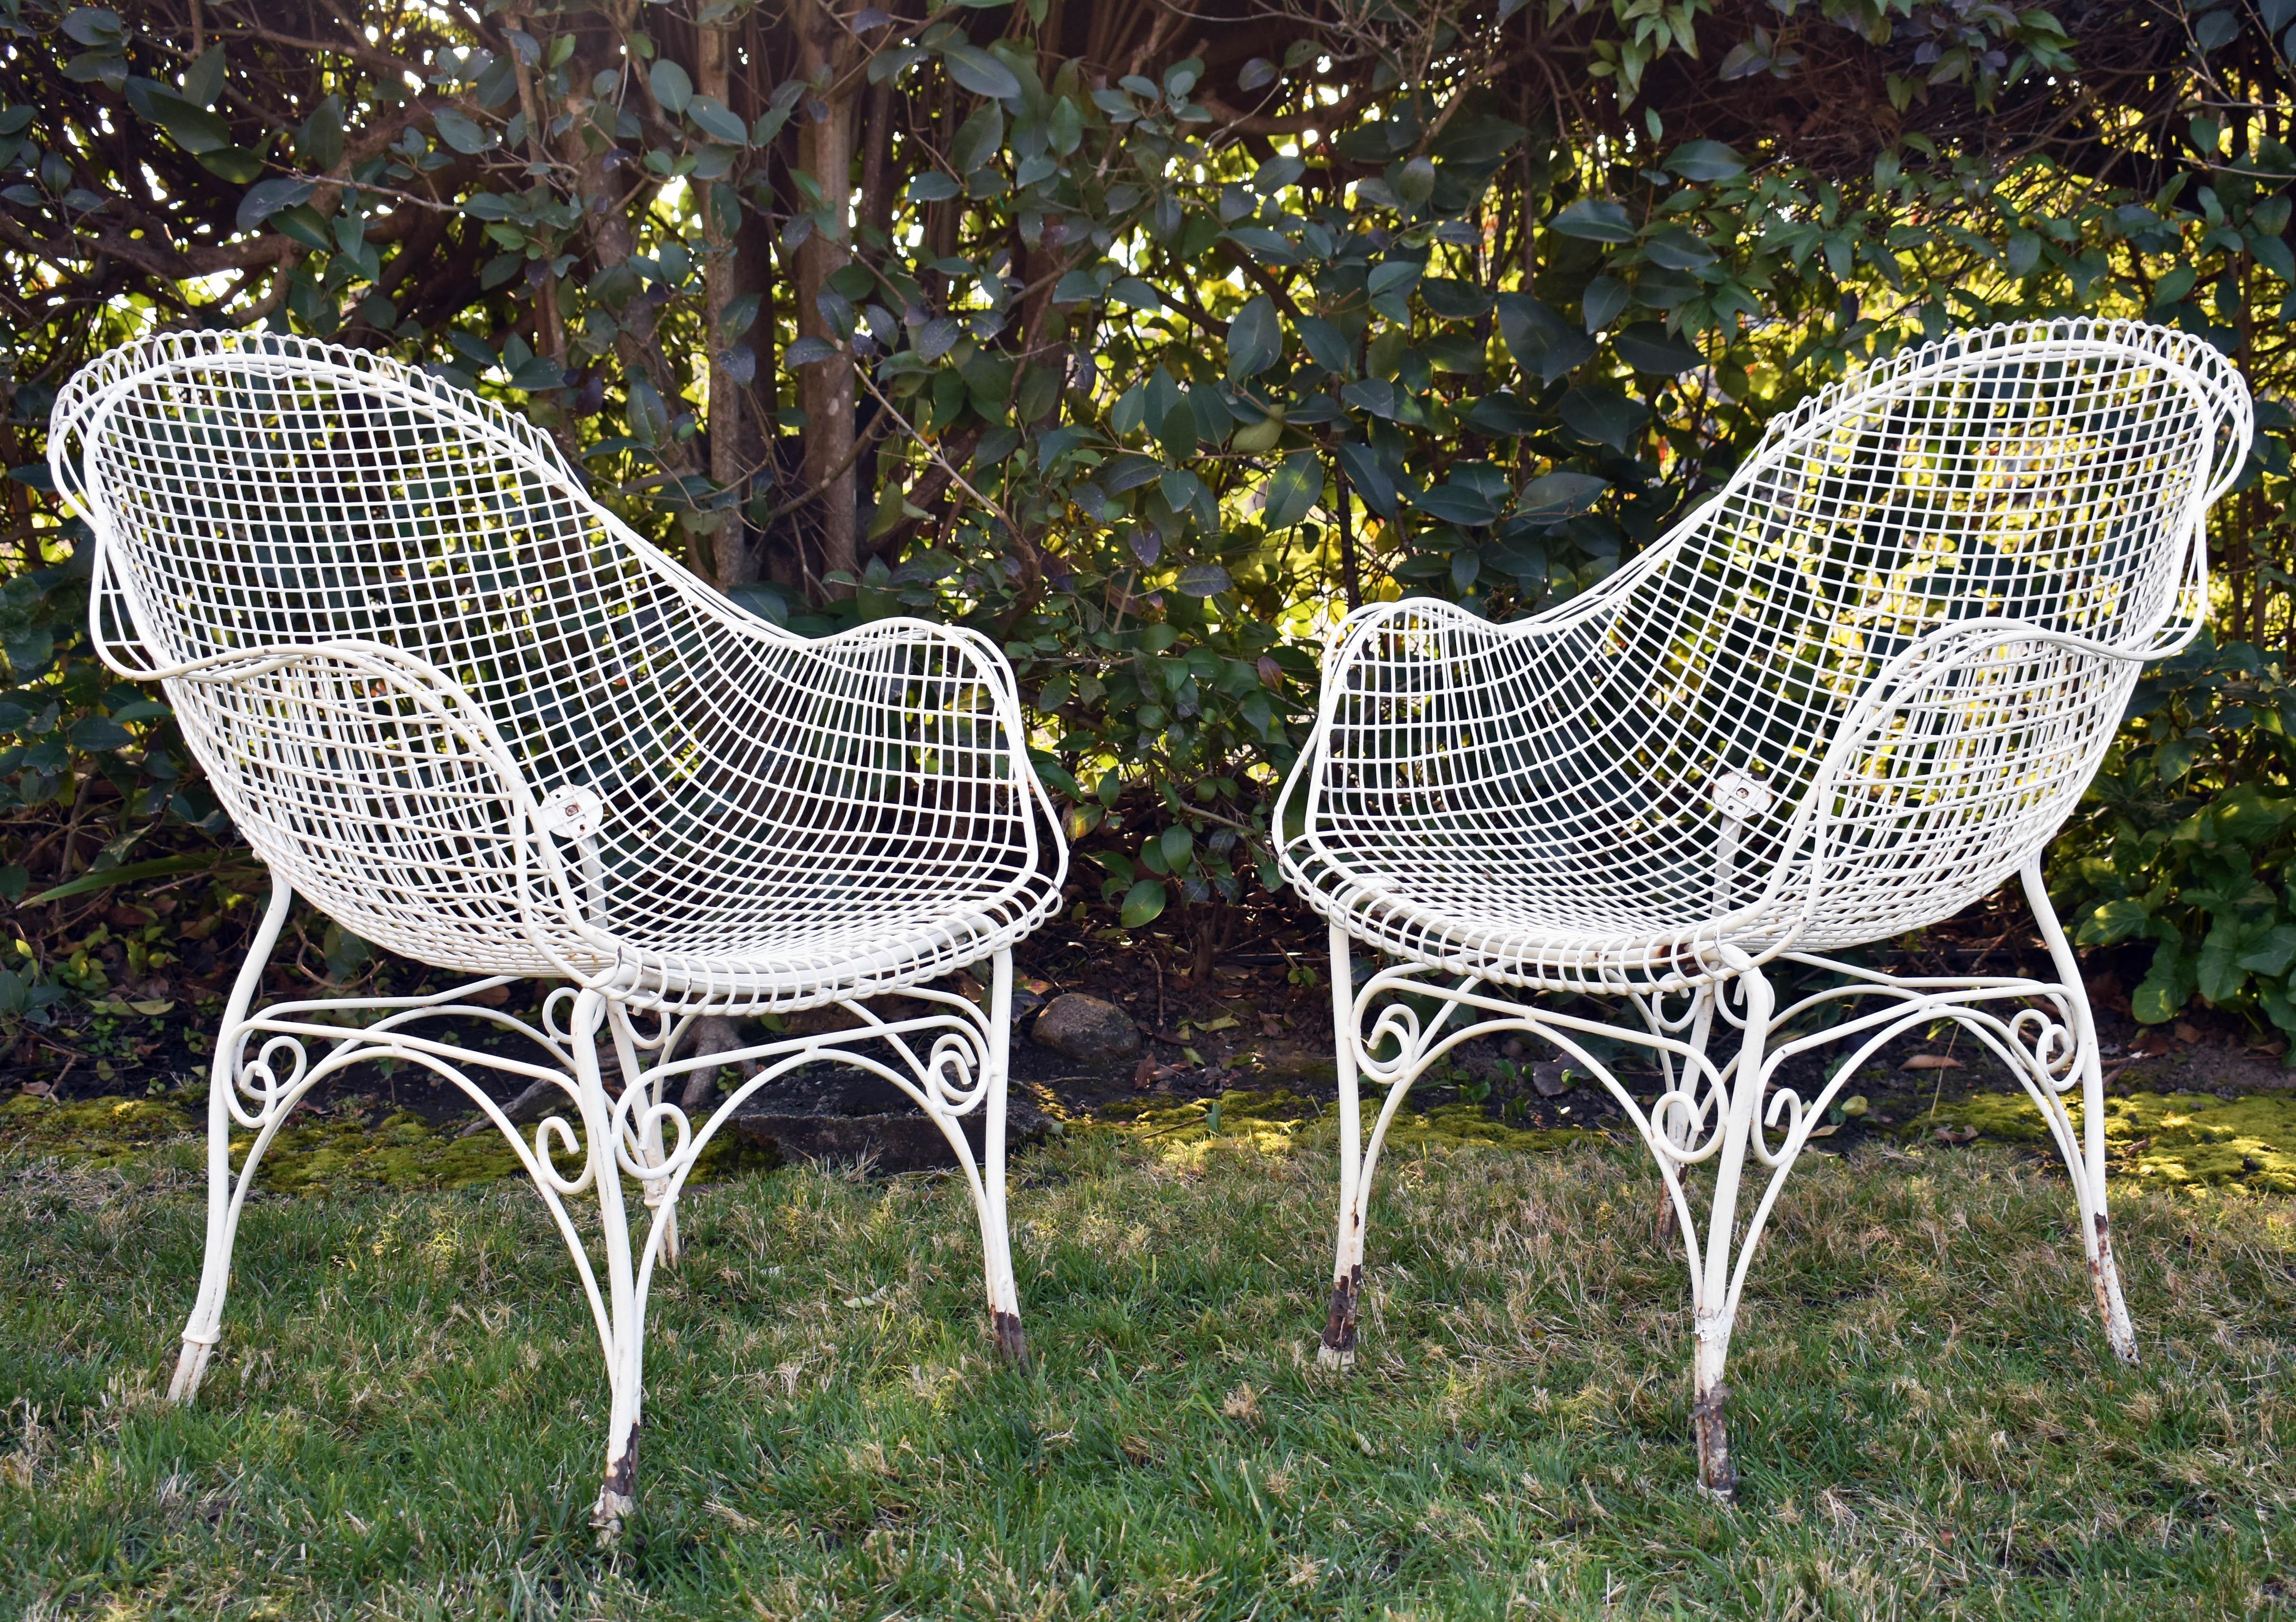 Pair of vintage white wire mesh garden chairs from France, c. 1960s. Volute details on chair bases. 

